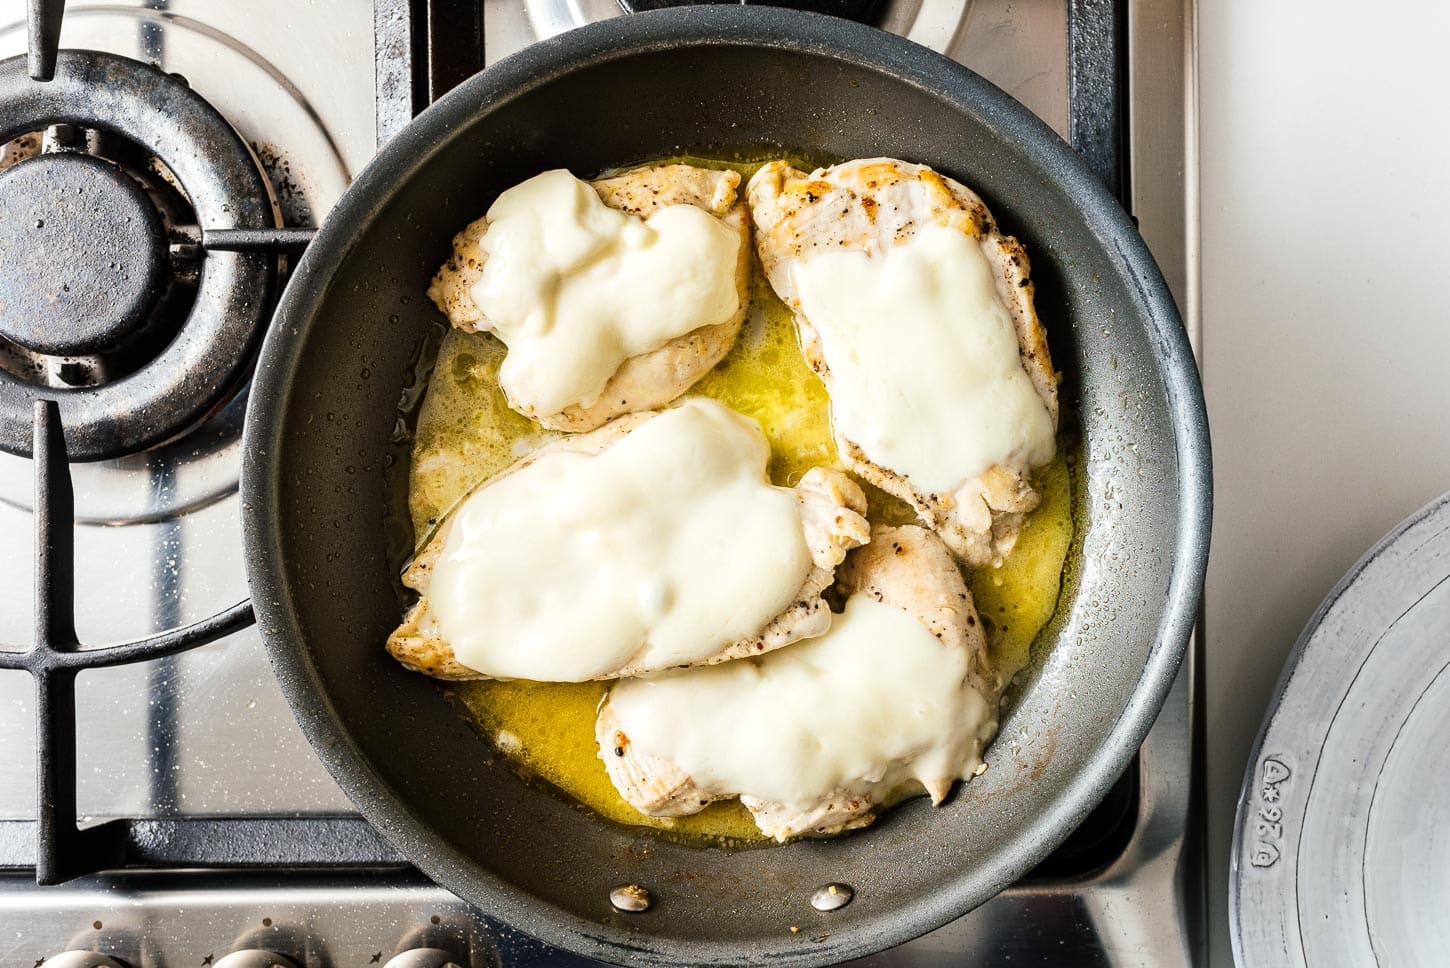 melting cheese on chicken |  www.iamafoodblog.com